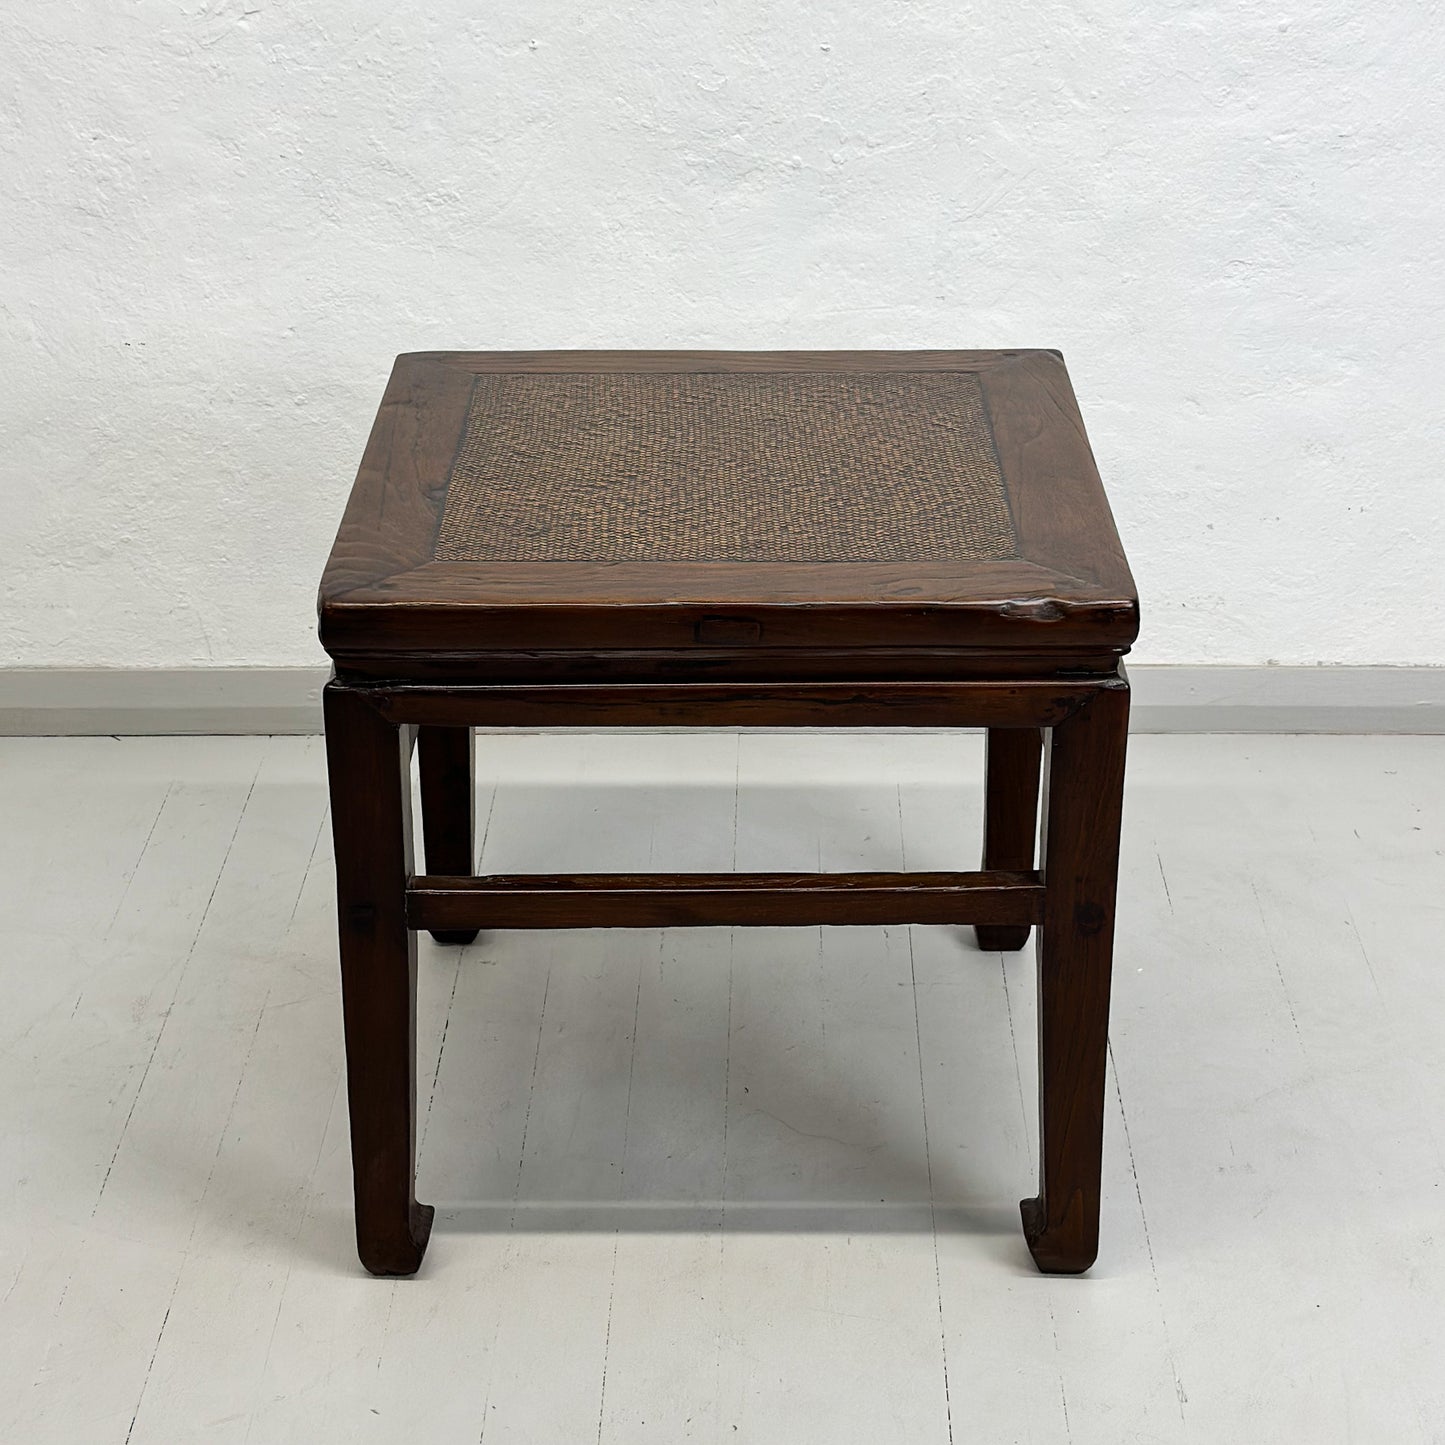 Vintage Rattan Inlay Side Table with Simple Stretcher Base